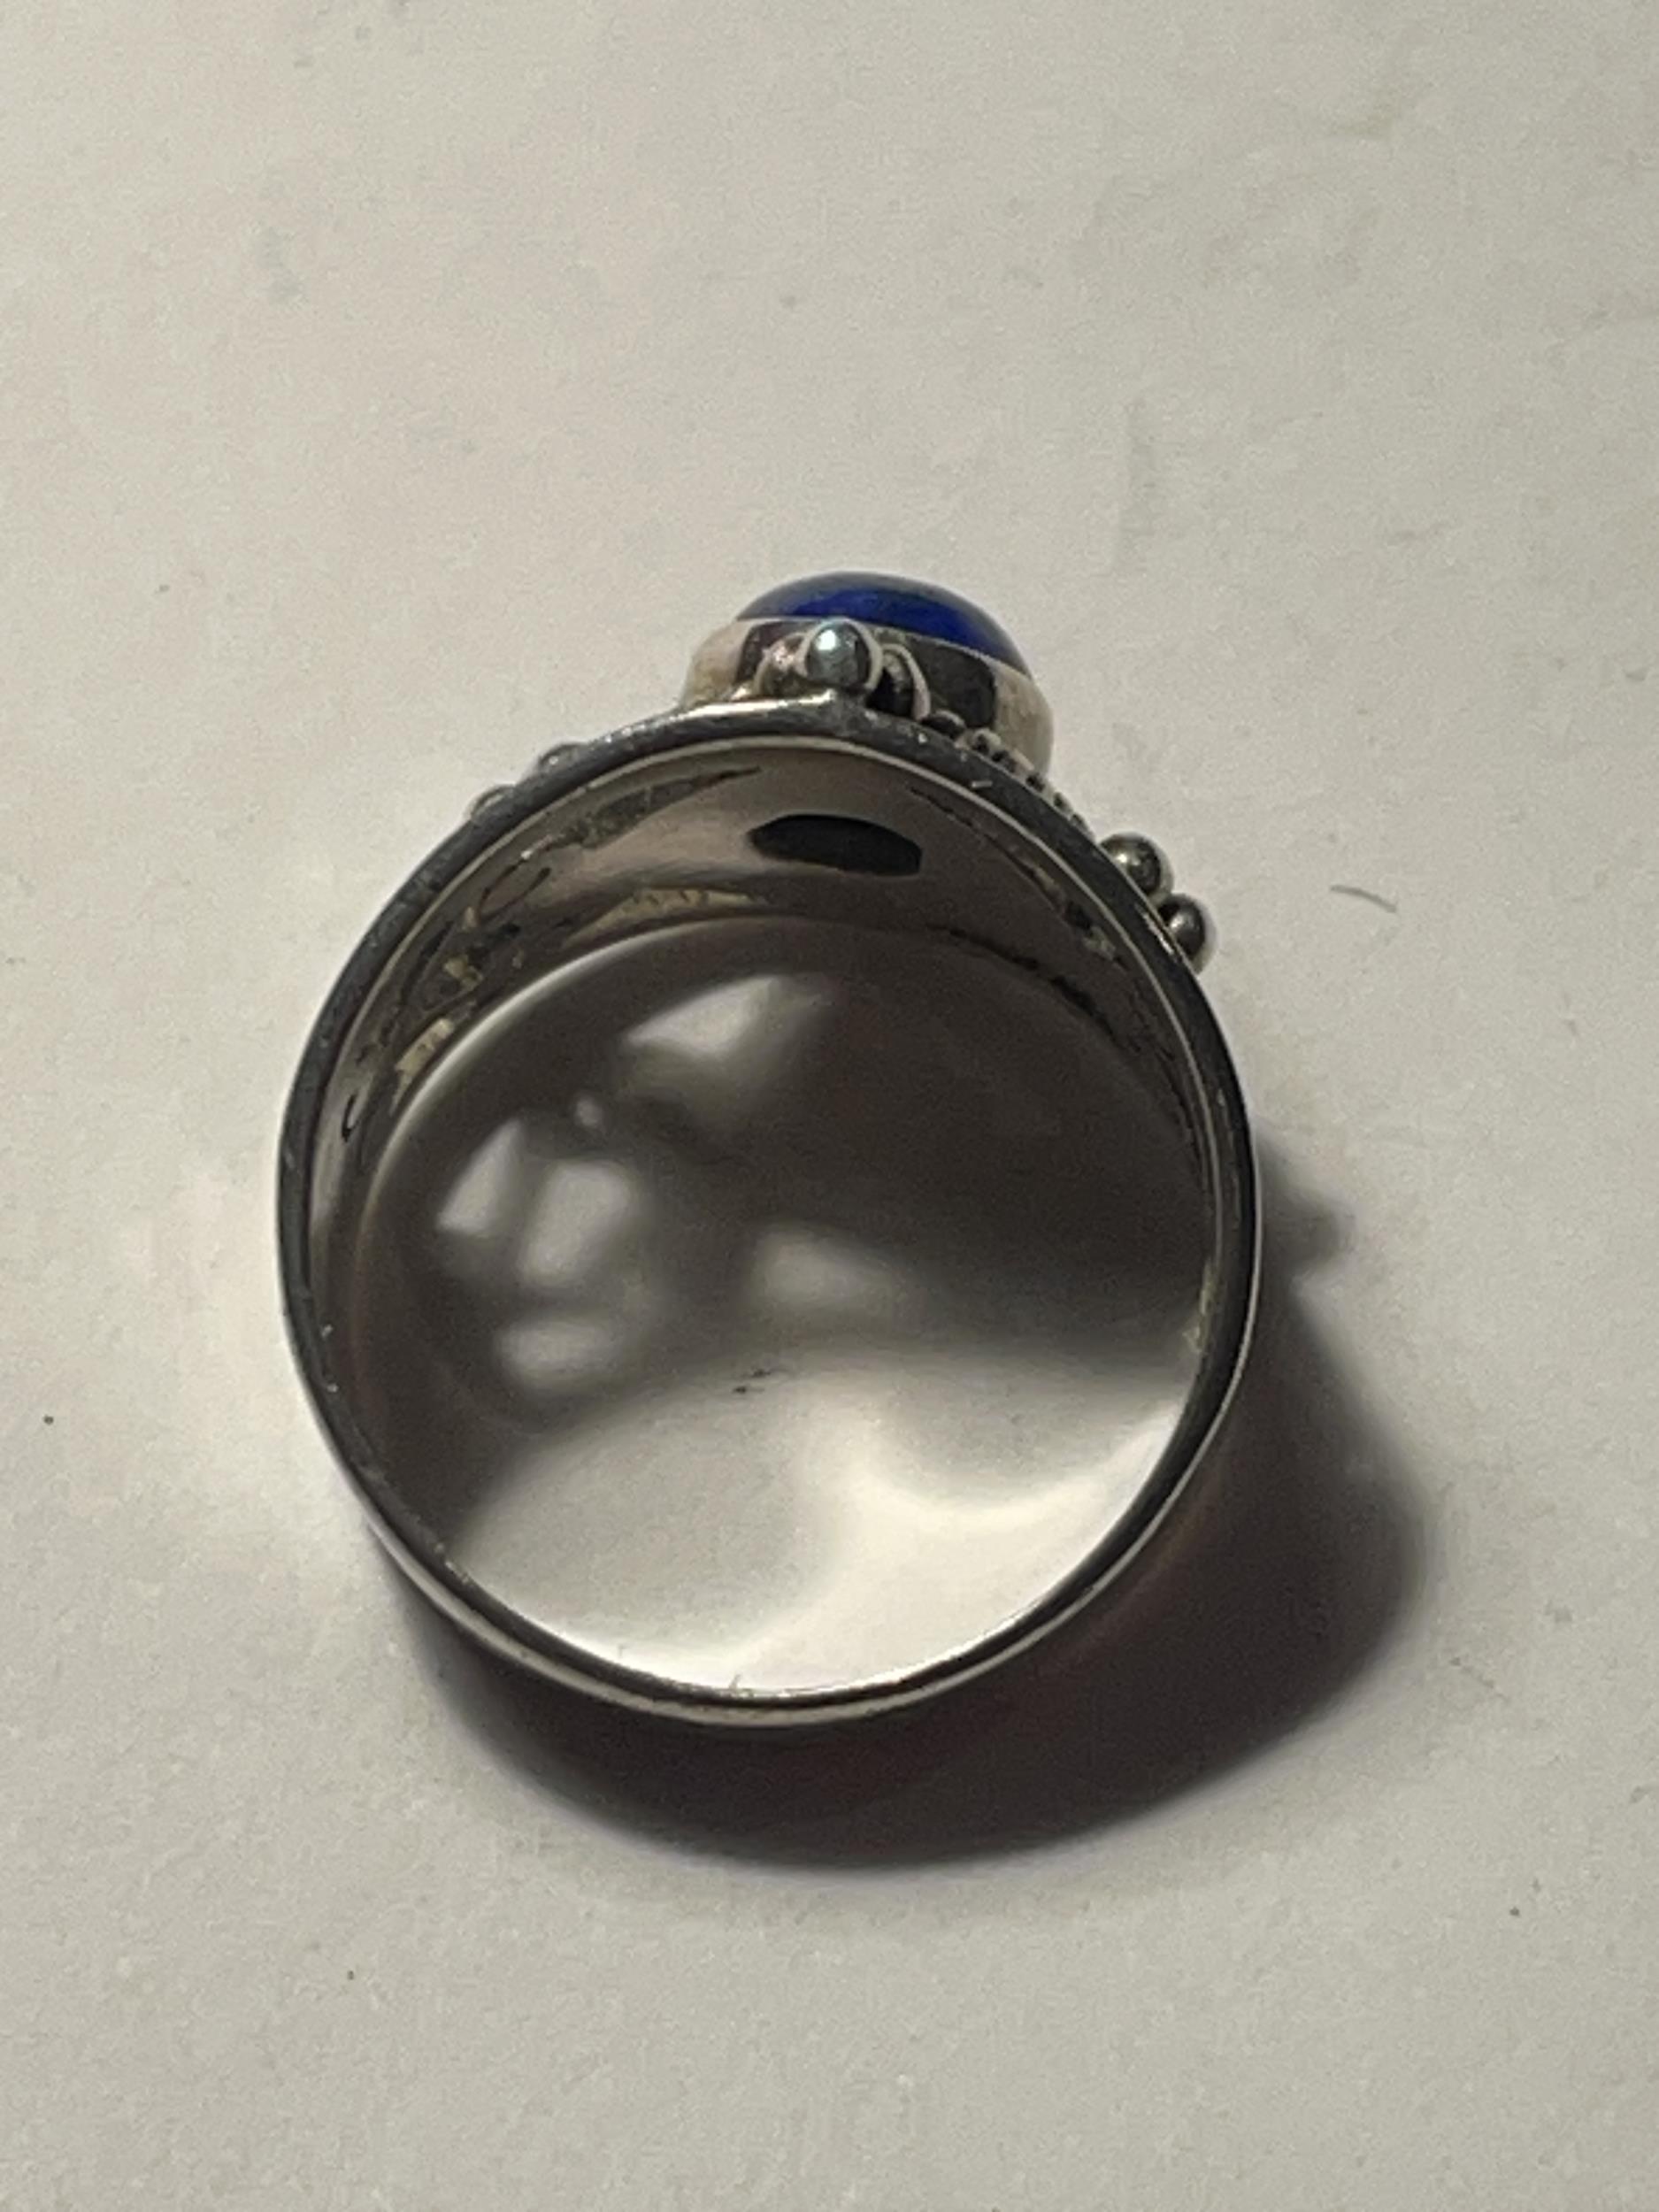 A SILVER DRESS RING WITH A BLUE CENTRE STONE IN A PRESENTATION BOX - Image 4 of 4